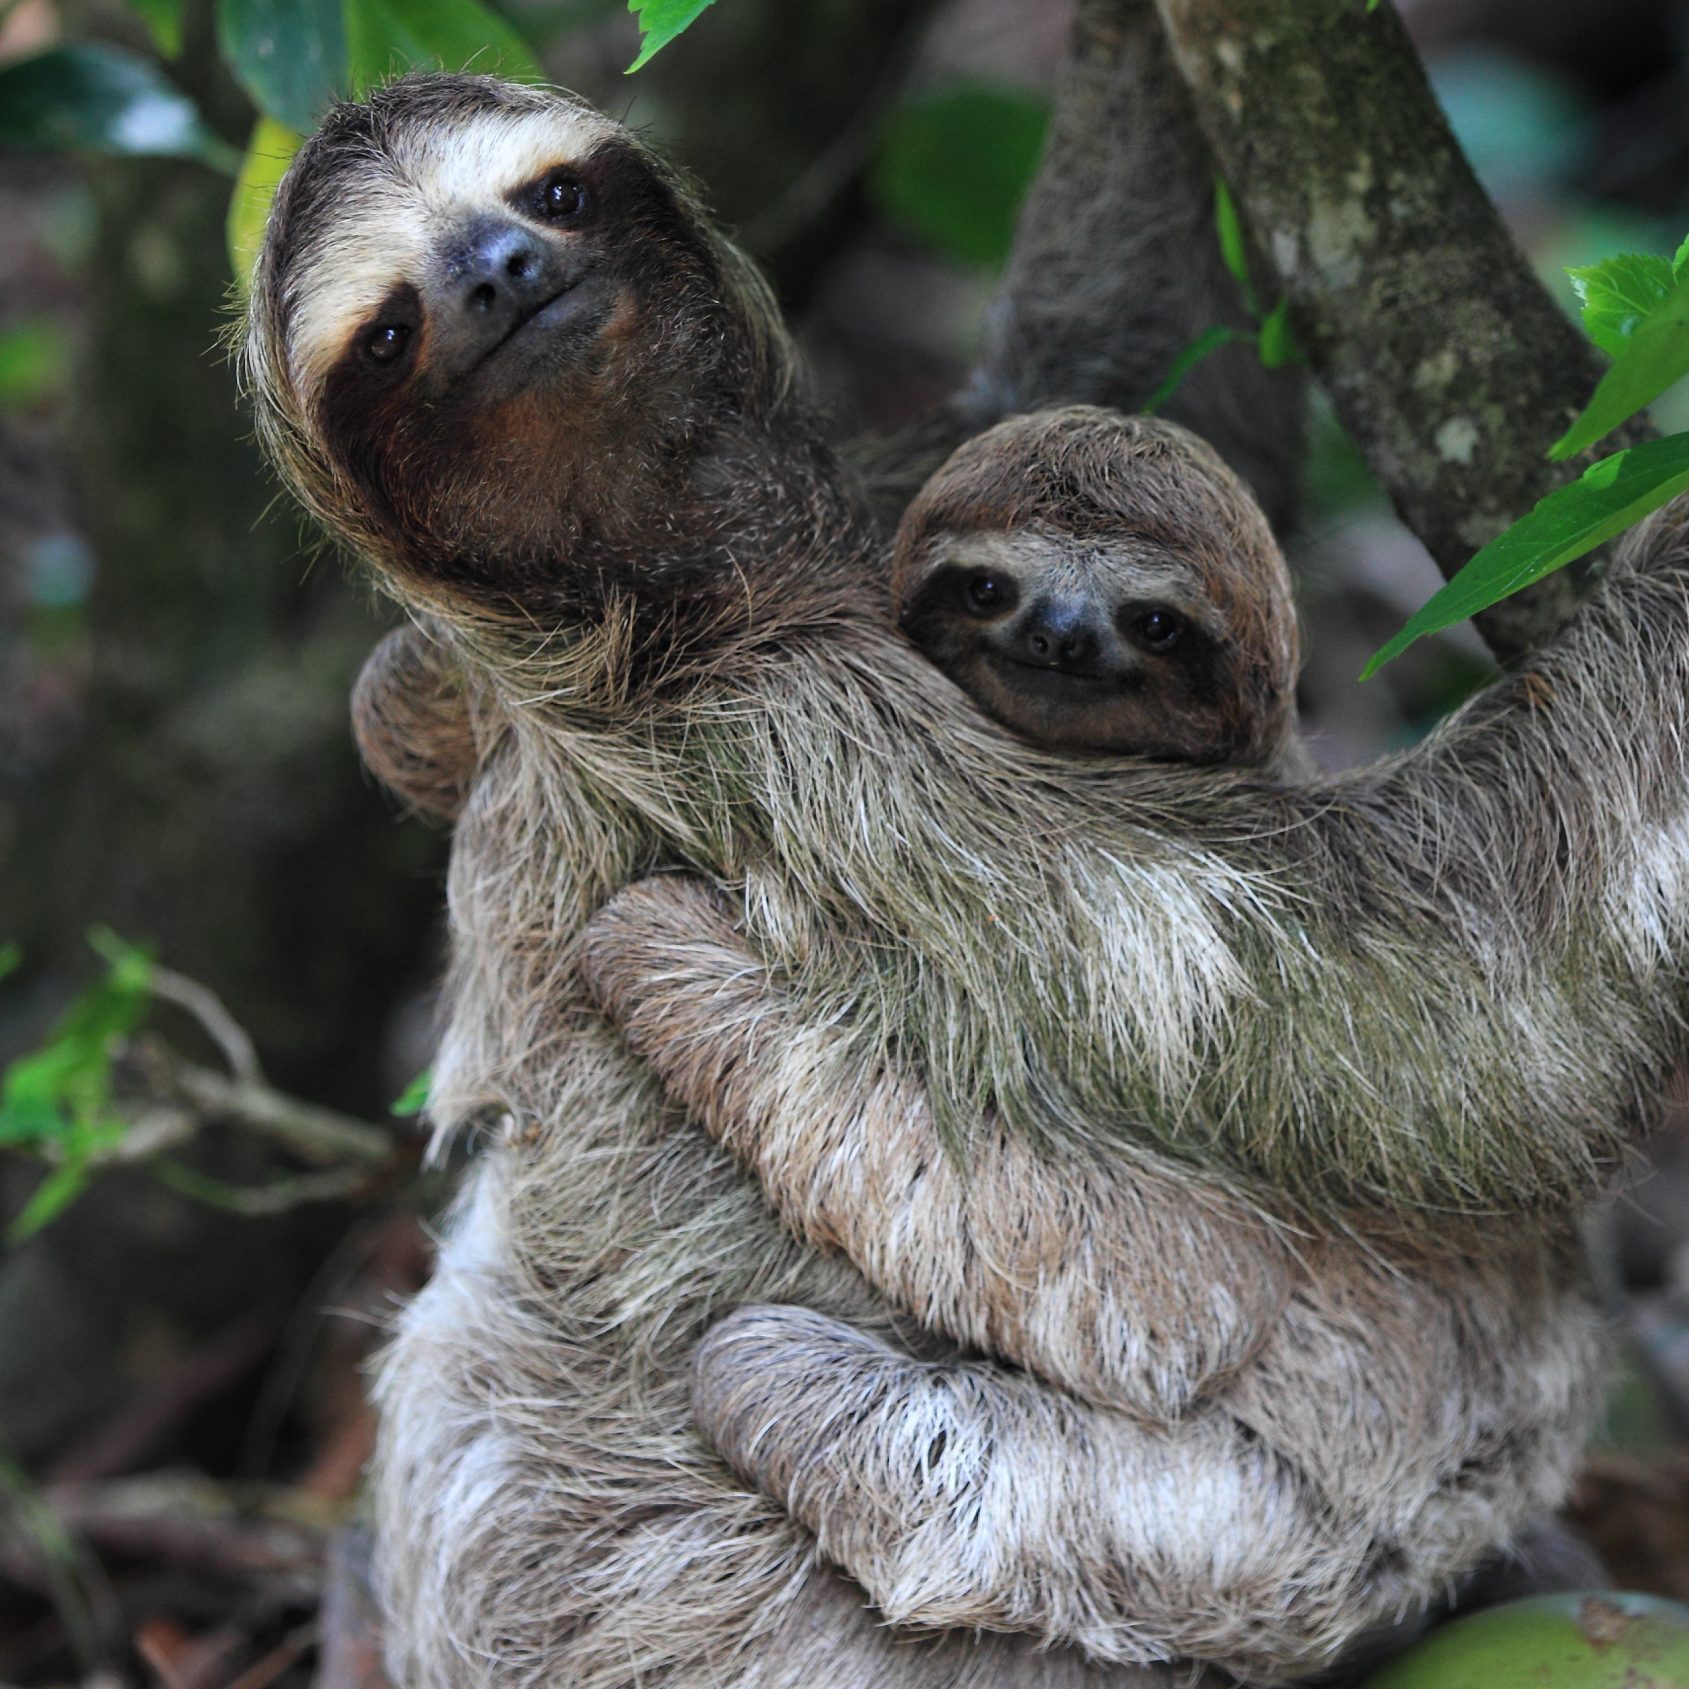 Two sloths in a tree.